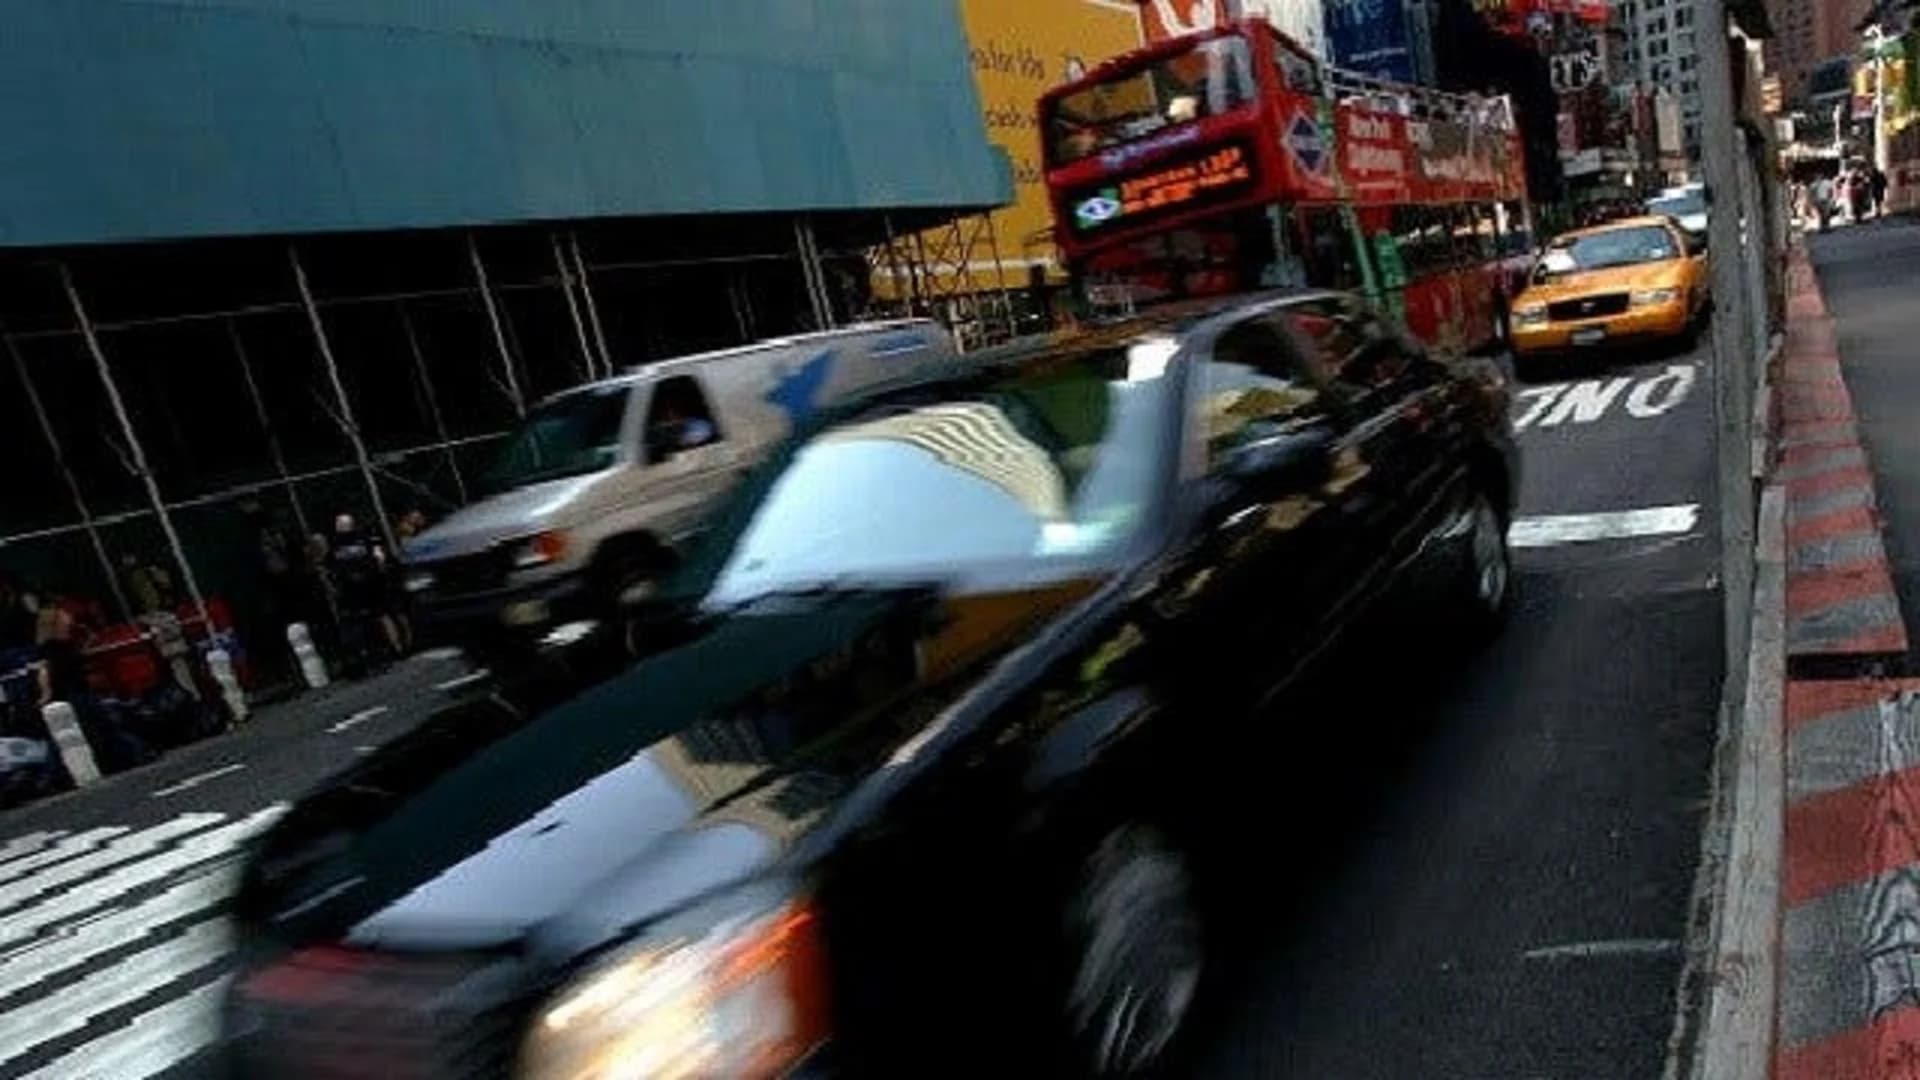 Congestion pricing: Driving in Manhattan could cost $11.52